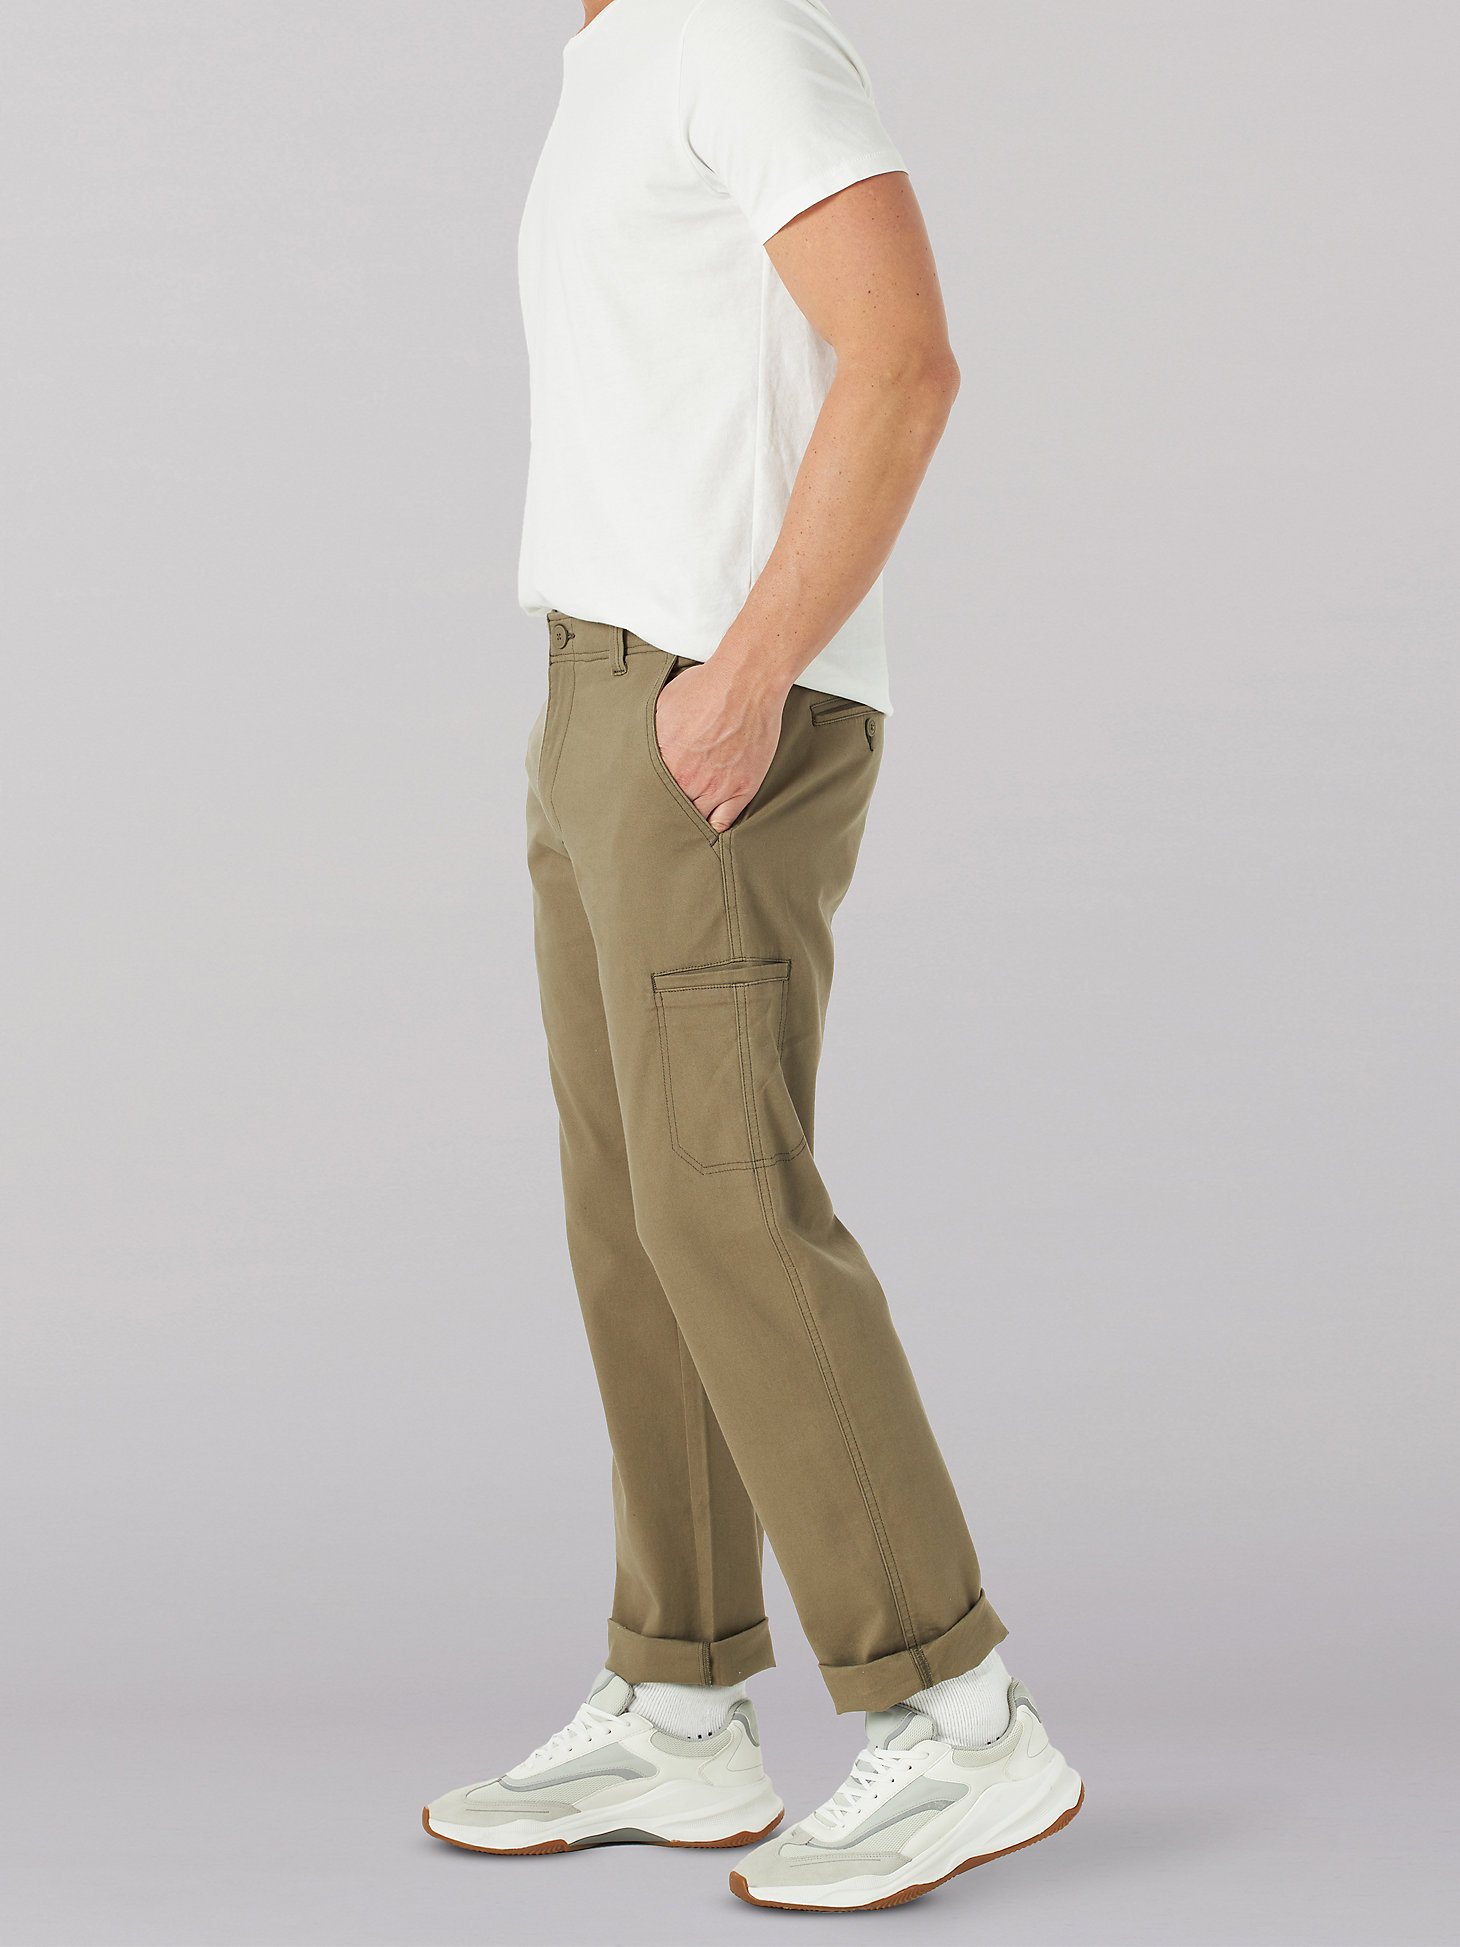 Men's Extreme Comfort Straight Fit Cargo Pant in Sirus alternative view 2